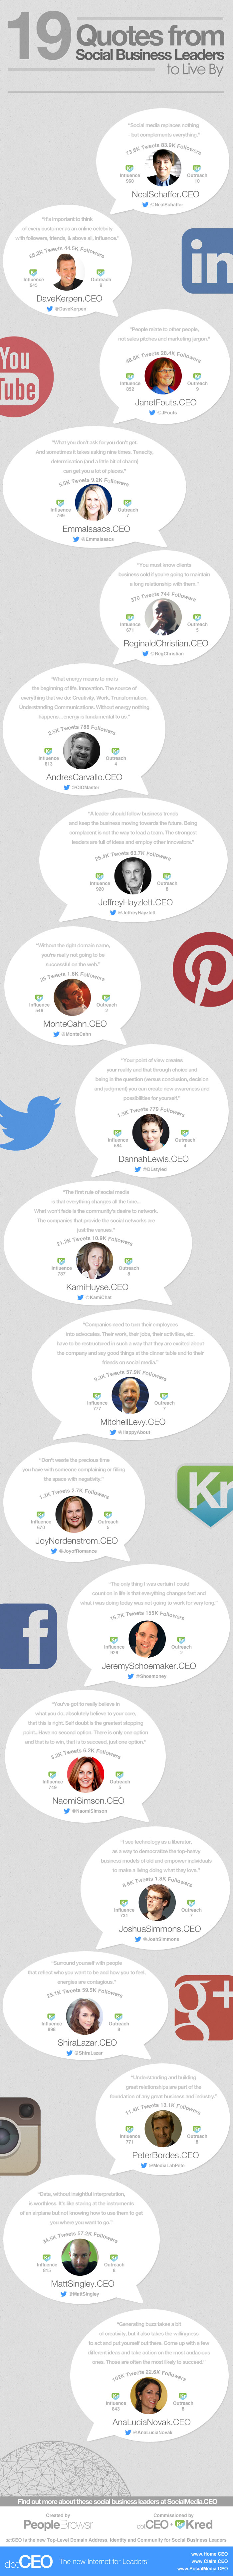 The 19 CEOs in this infographic lead the way on Social Media 